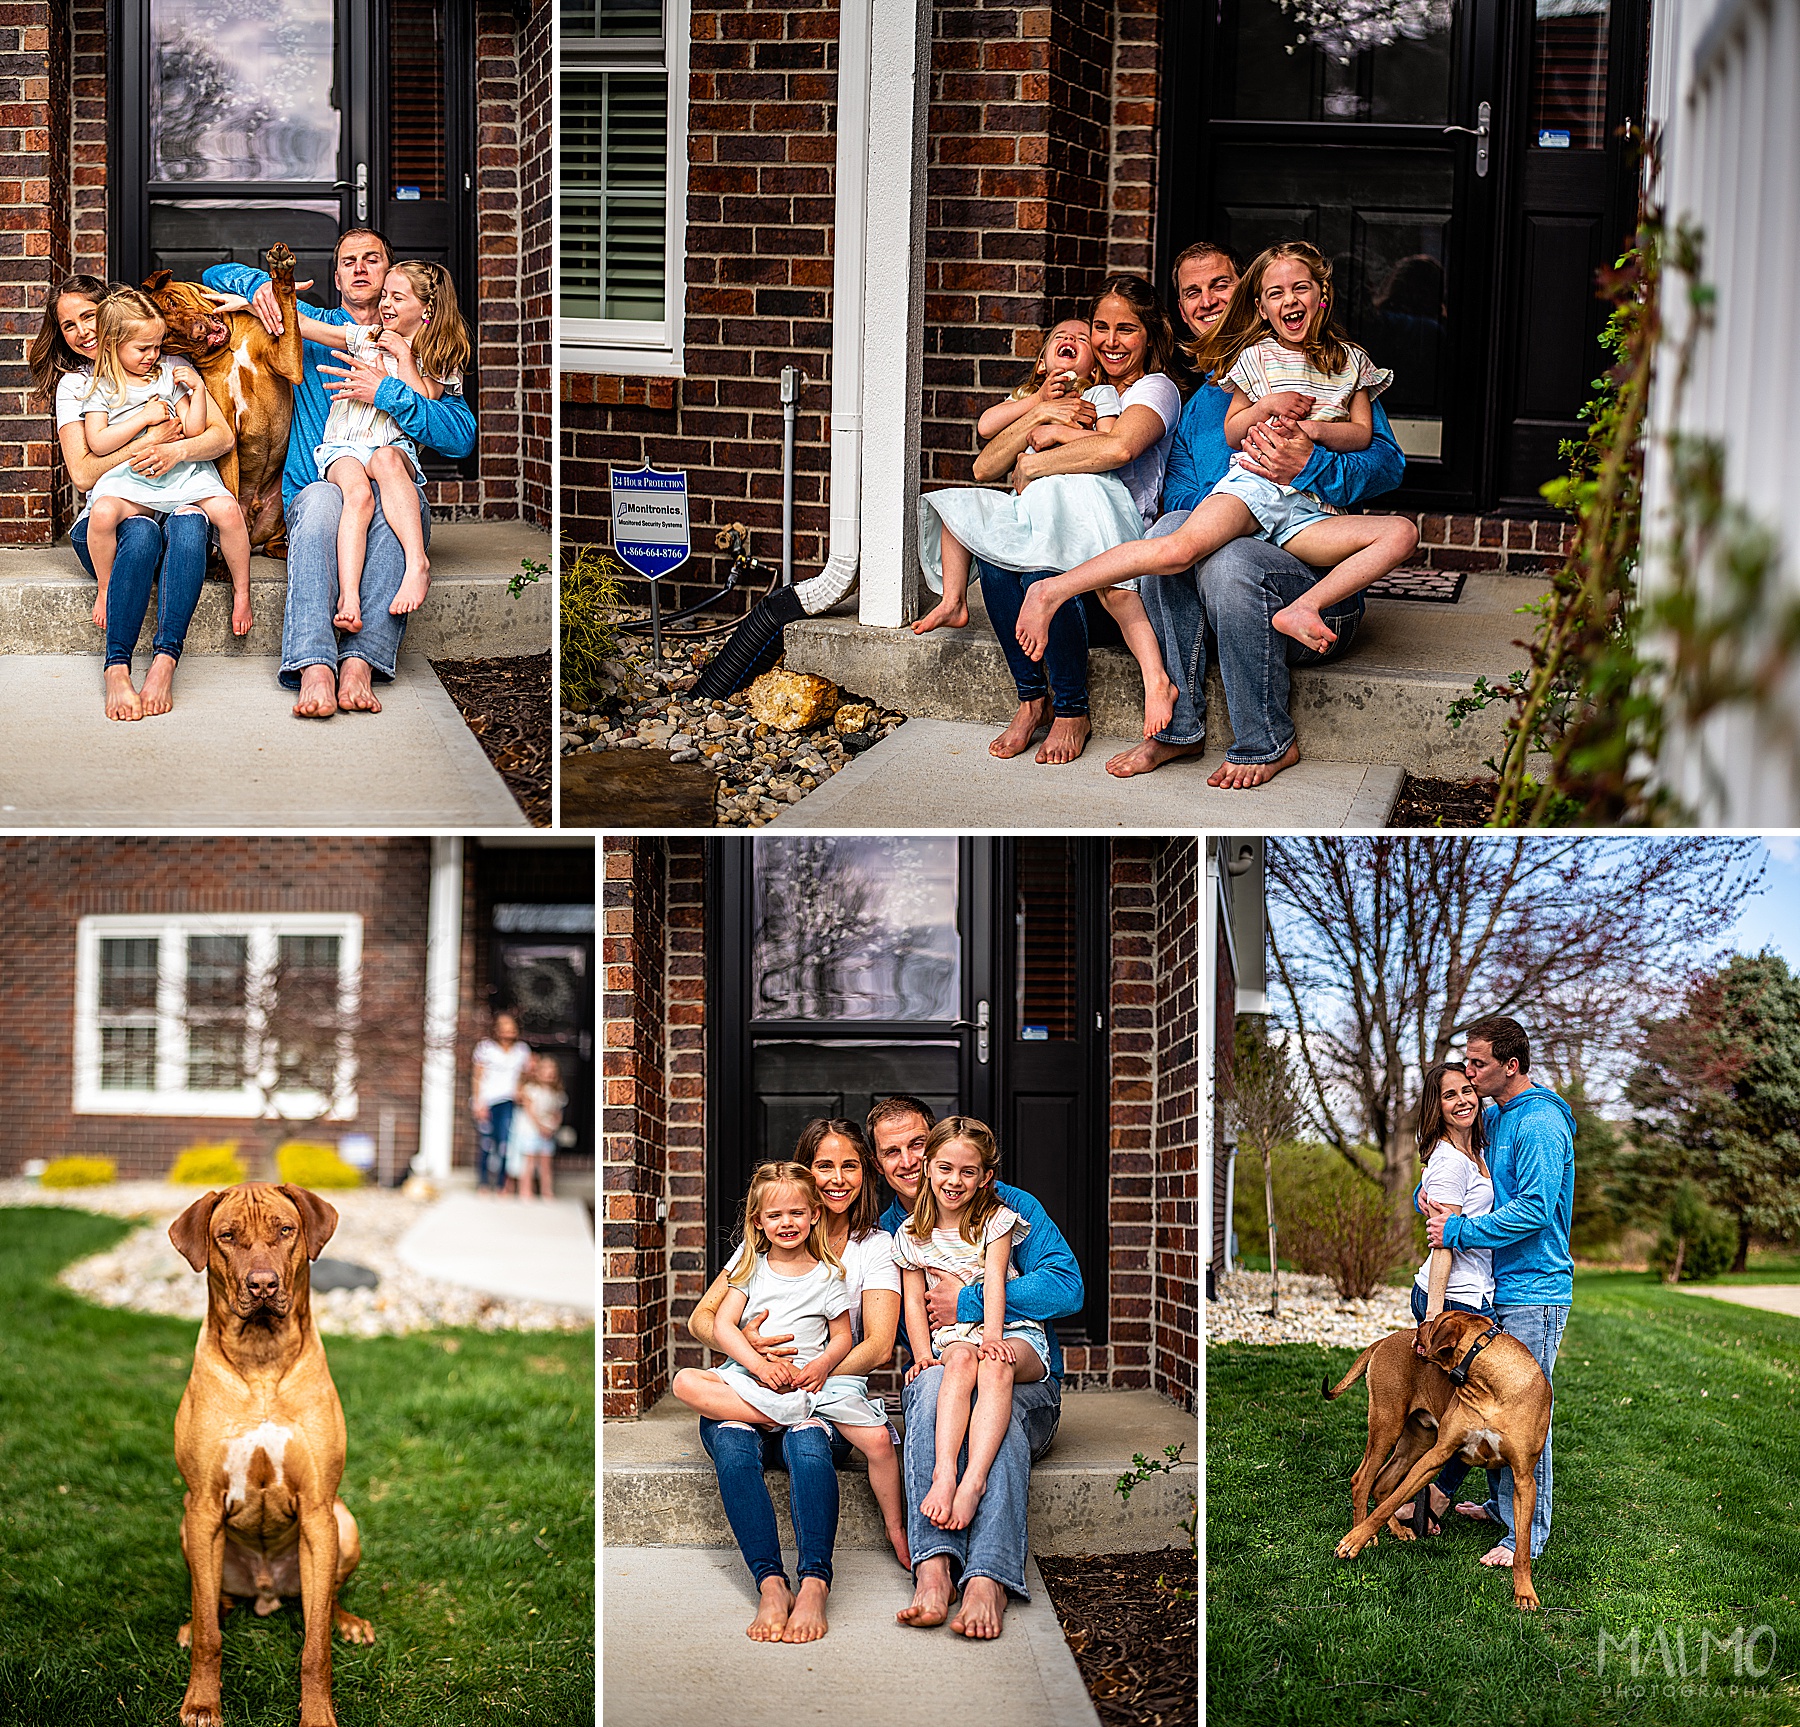 indianapolis front steps project, family photos at home, dog, kids, covid-19 quarantine photos